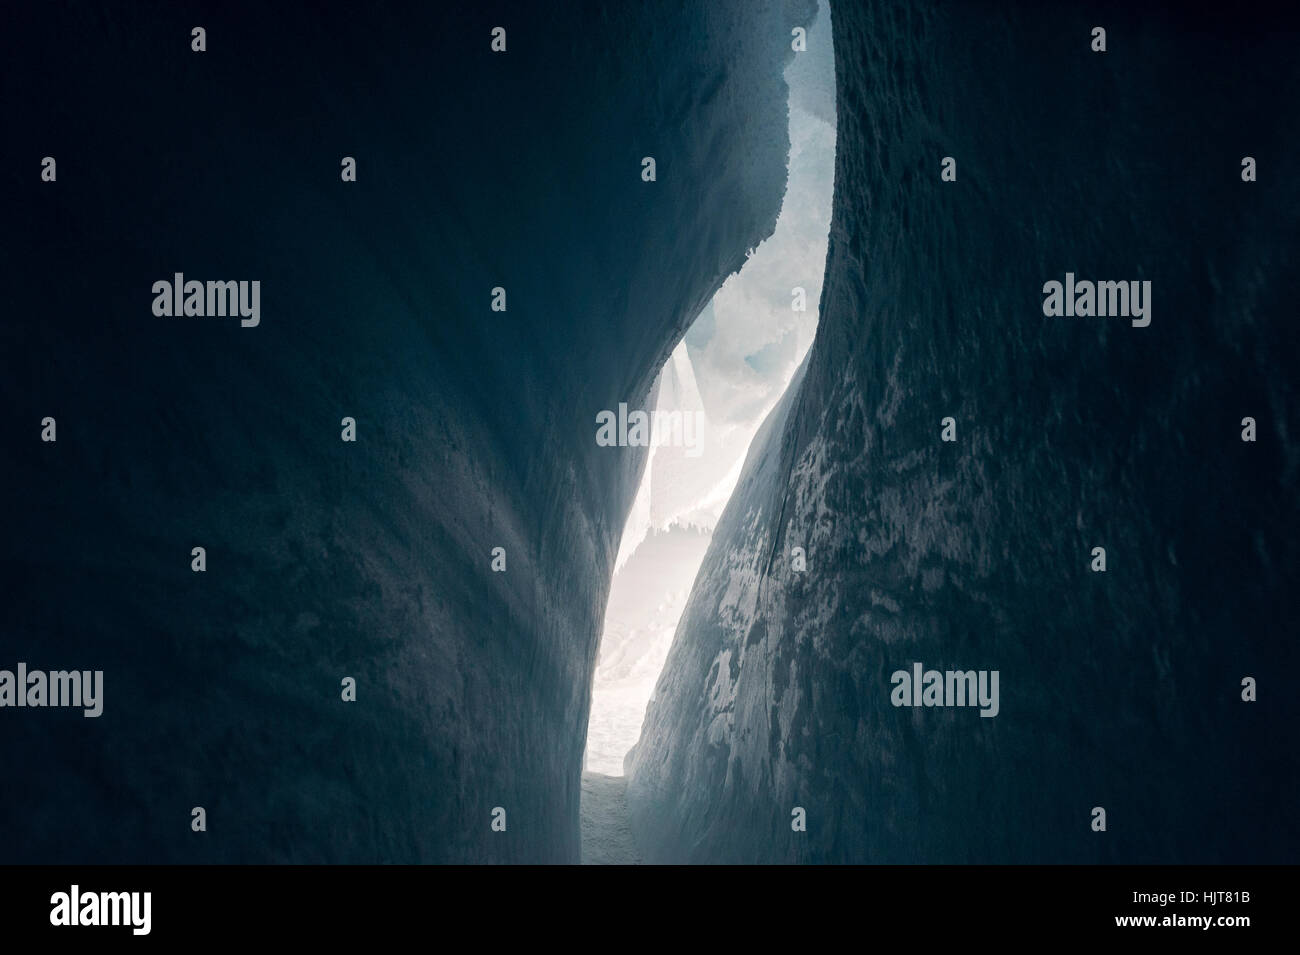 The frozen ceiling and icy walls of an ice cave in the Erebus Glacier Tongue. Stock Photo